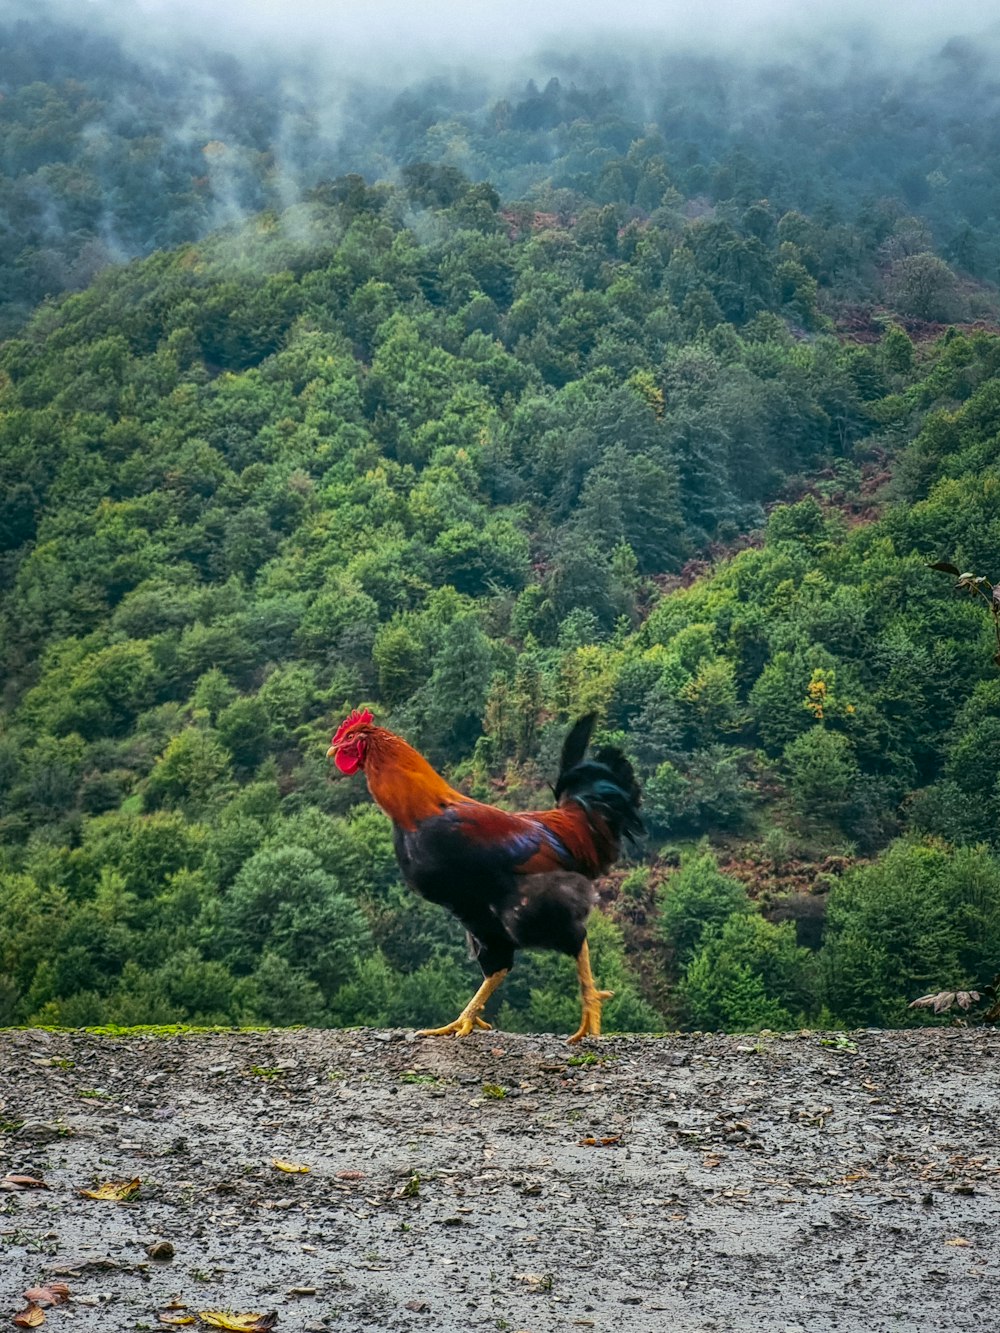 a rooster is walking on the ground in front of a mountain